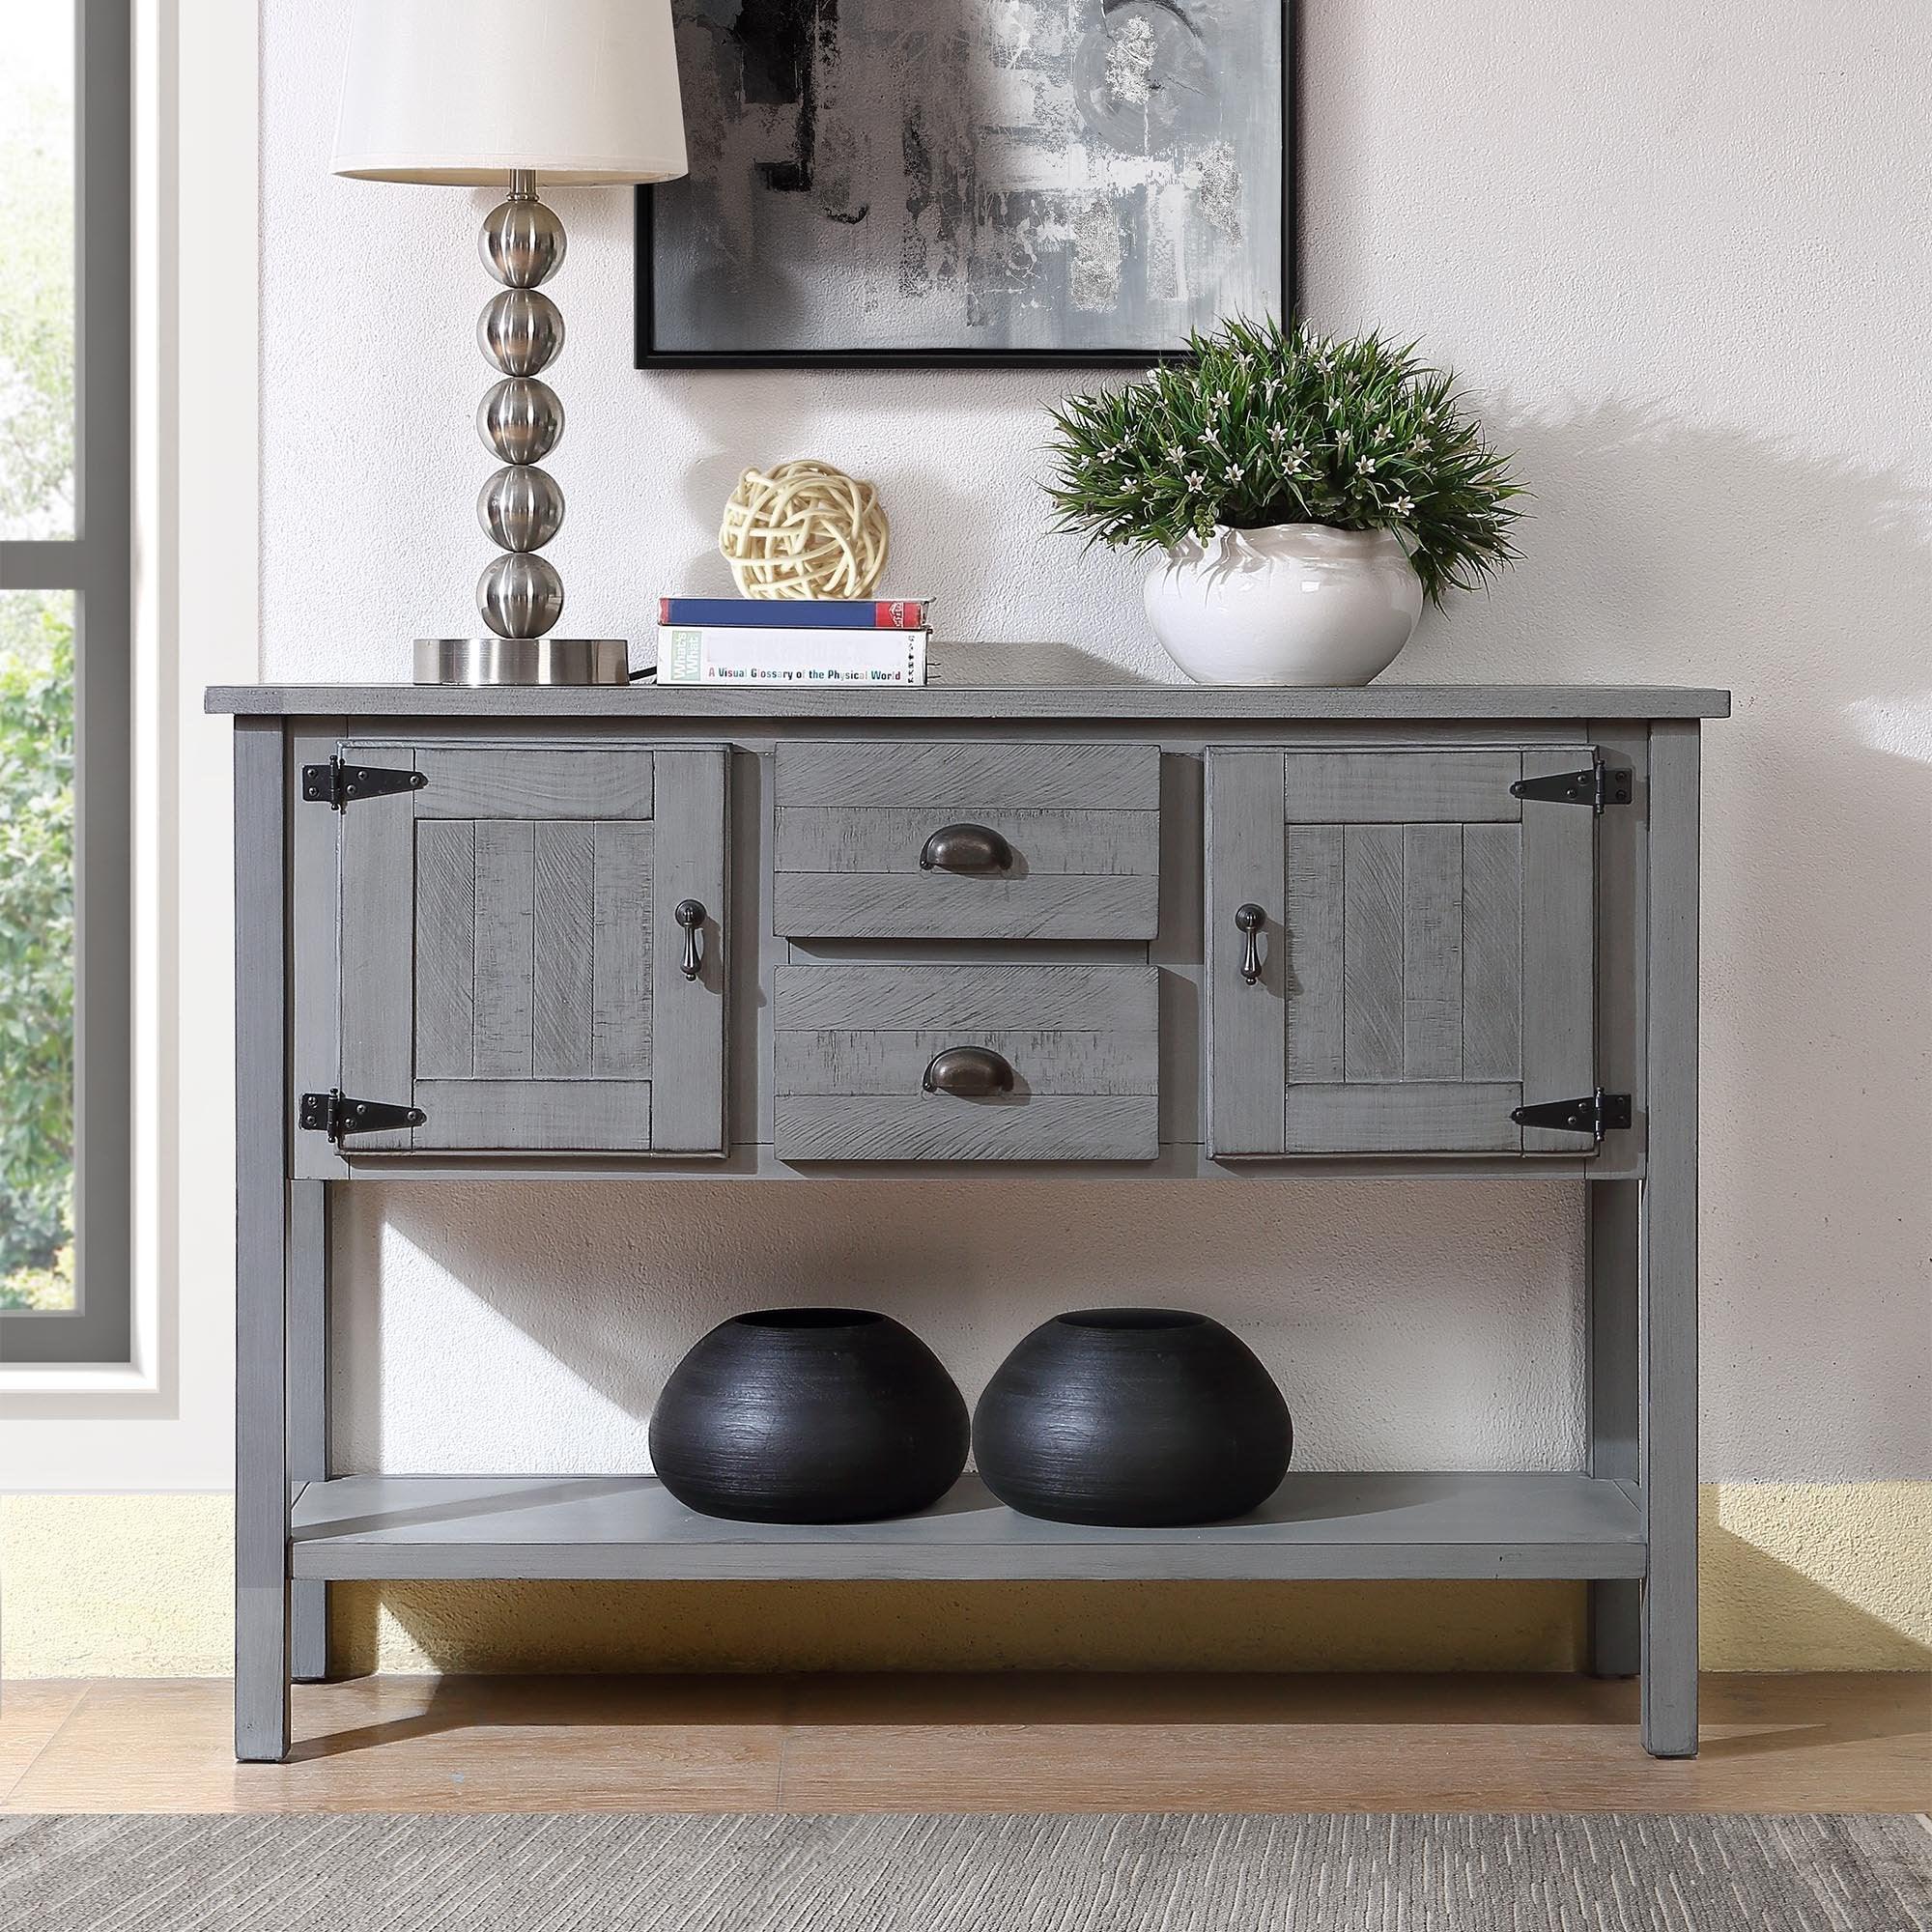 48'' Solid Wood Sideboard Console Table With 2 Drawers And Cabinets And Bottom Shelf, Retro Style Storage Dining Buffet Server Cabinet For Living Room Kitchen Dining Room(Antique Gray) LamCham